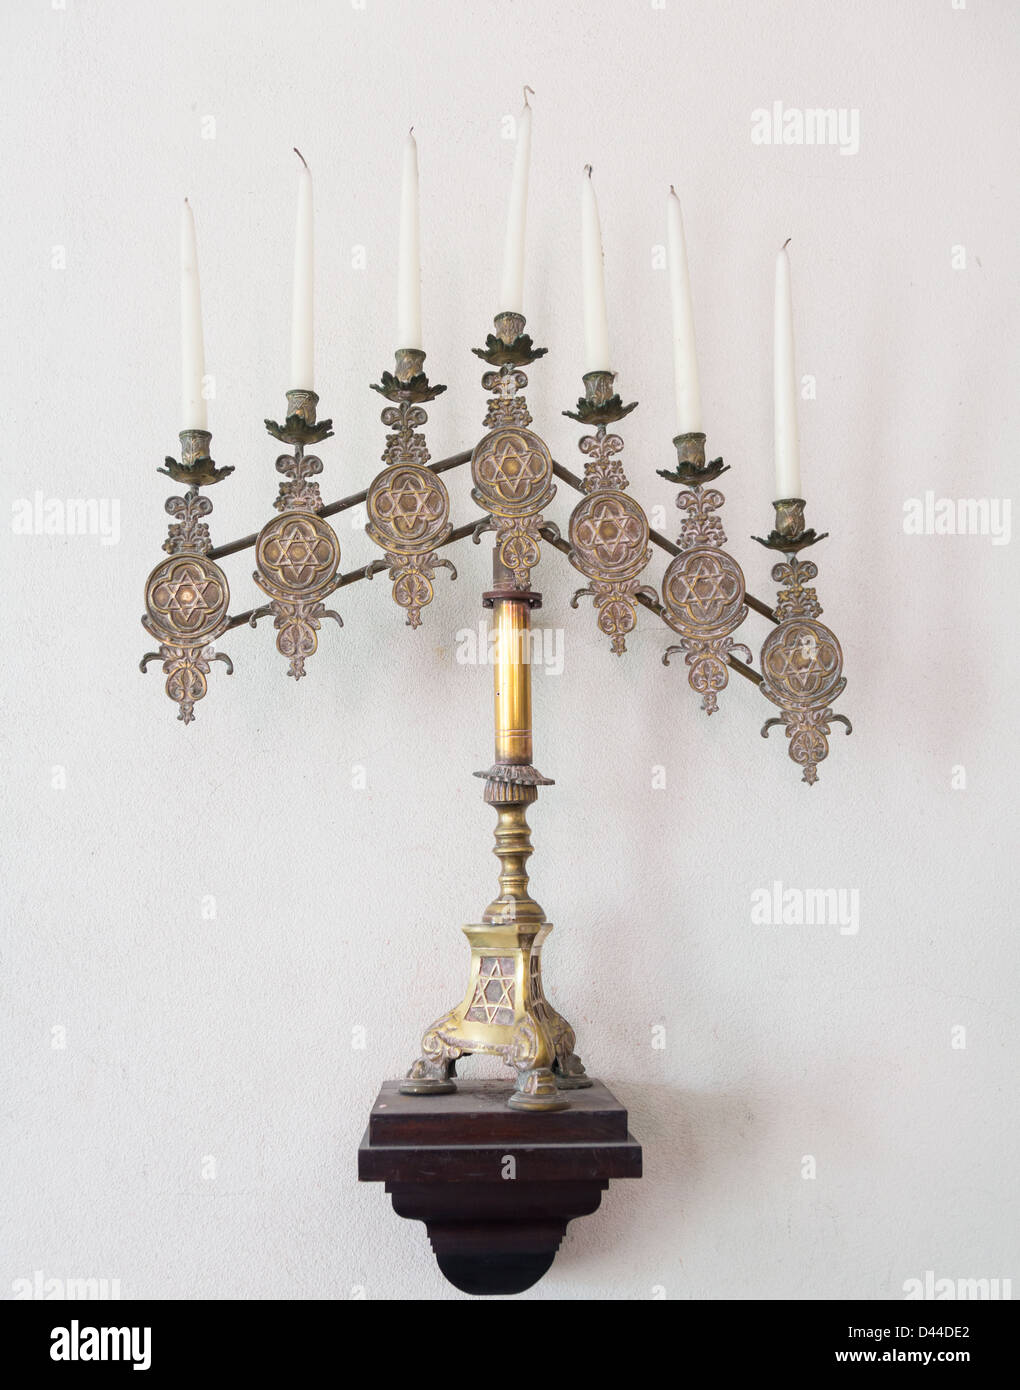 Antique ornate menorah in brass with old tallow candles Stock Photo